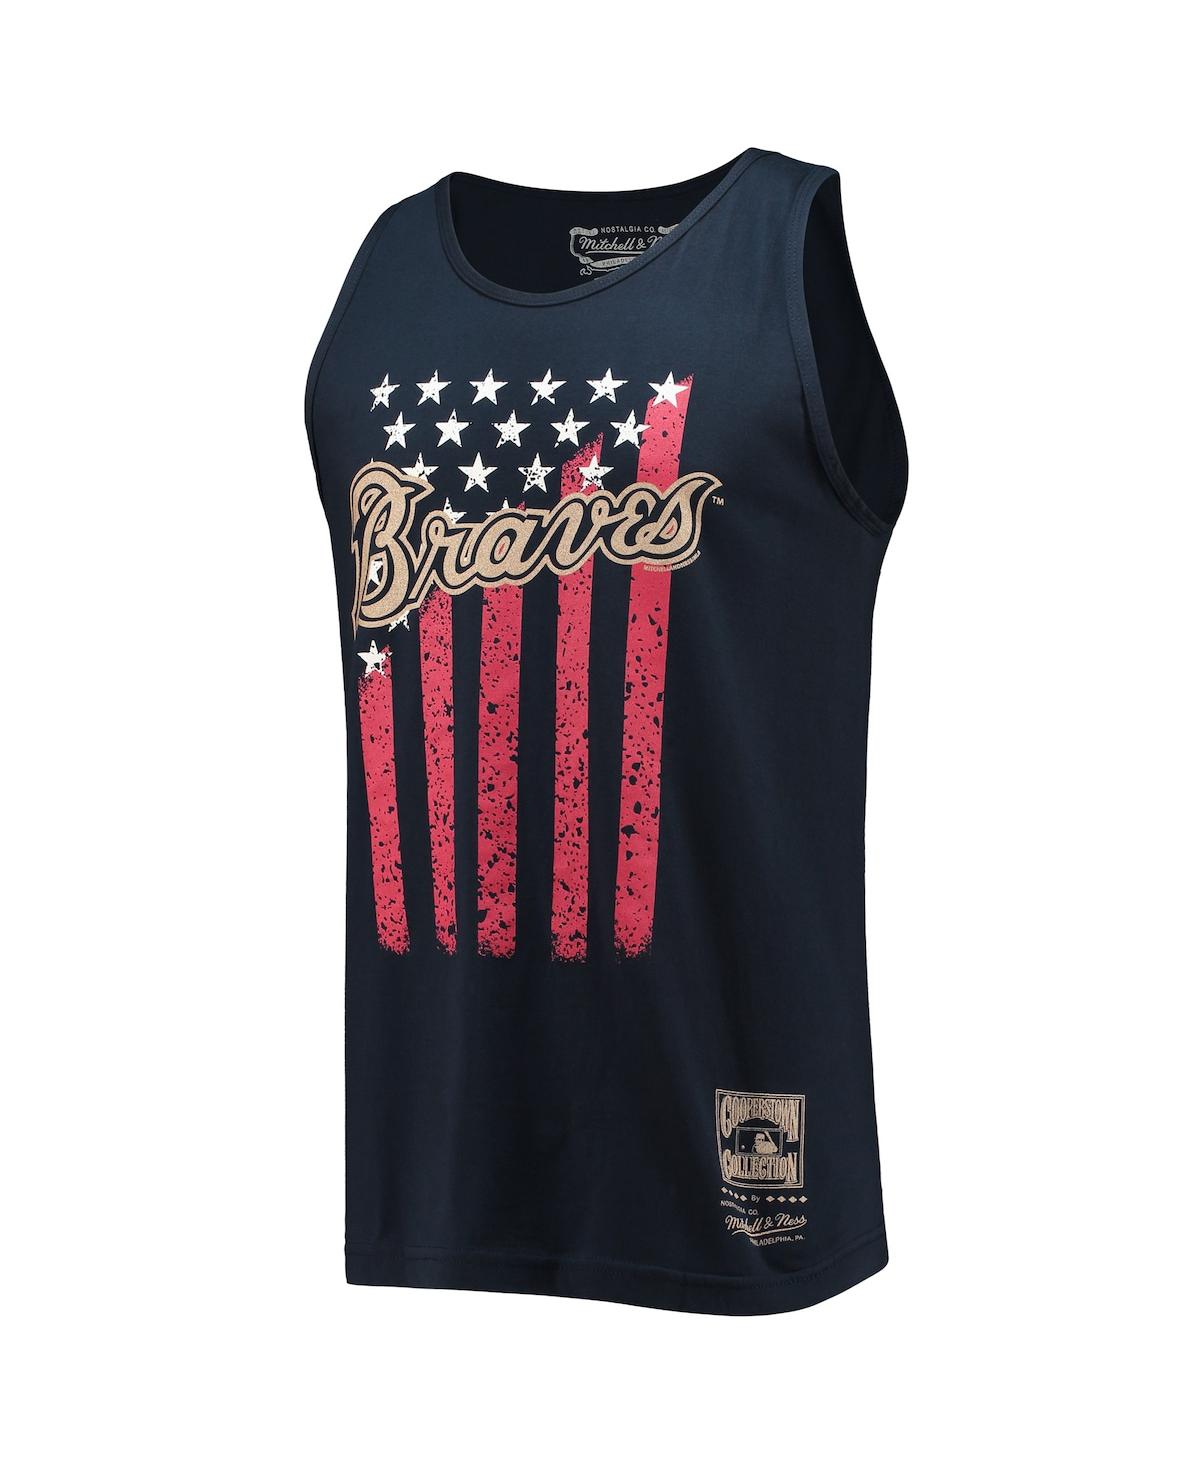 Mitchell & Ness Cooperstown Collection Stars and Stripes Tank Top - Navy - Atlanta Braves M